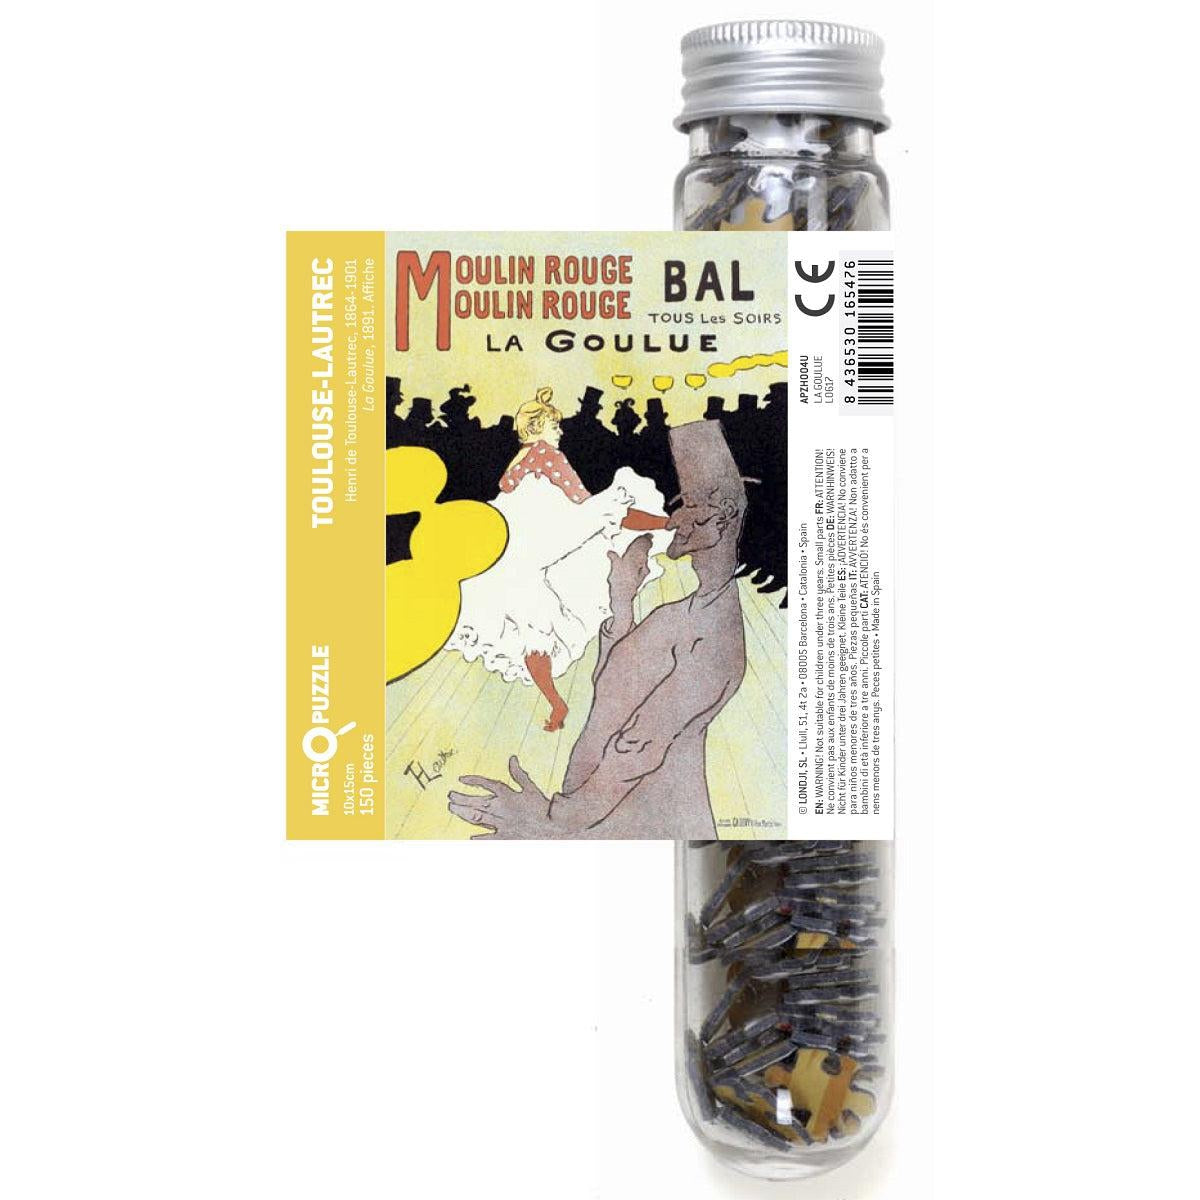 Front view of the Classic Art-Micropuzzle-La Goulue-150 Piece in its test tube with sticker label pulled out to show the entire painting.